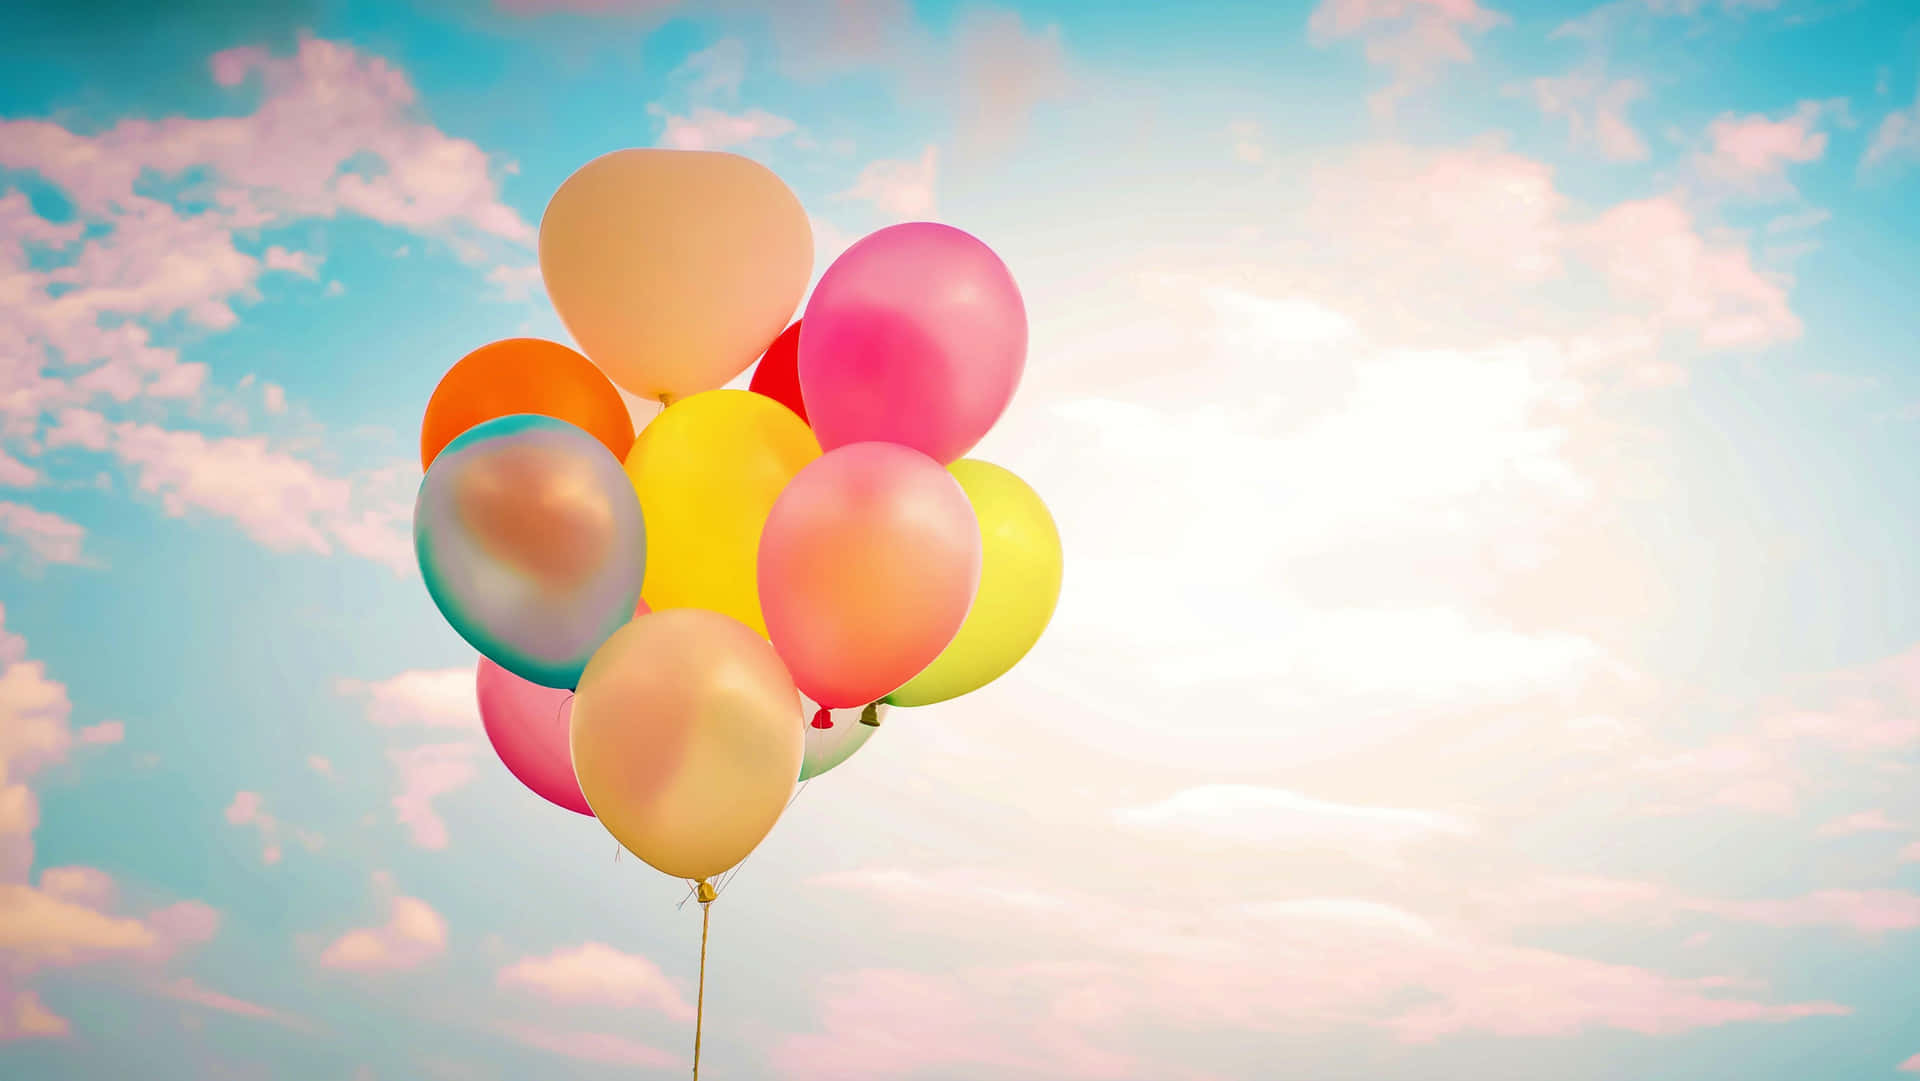 Colorful balloons make a beautiful display in the sky